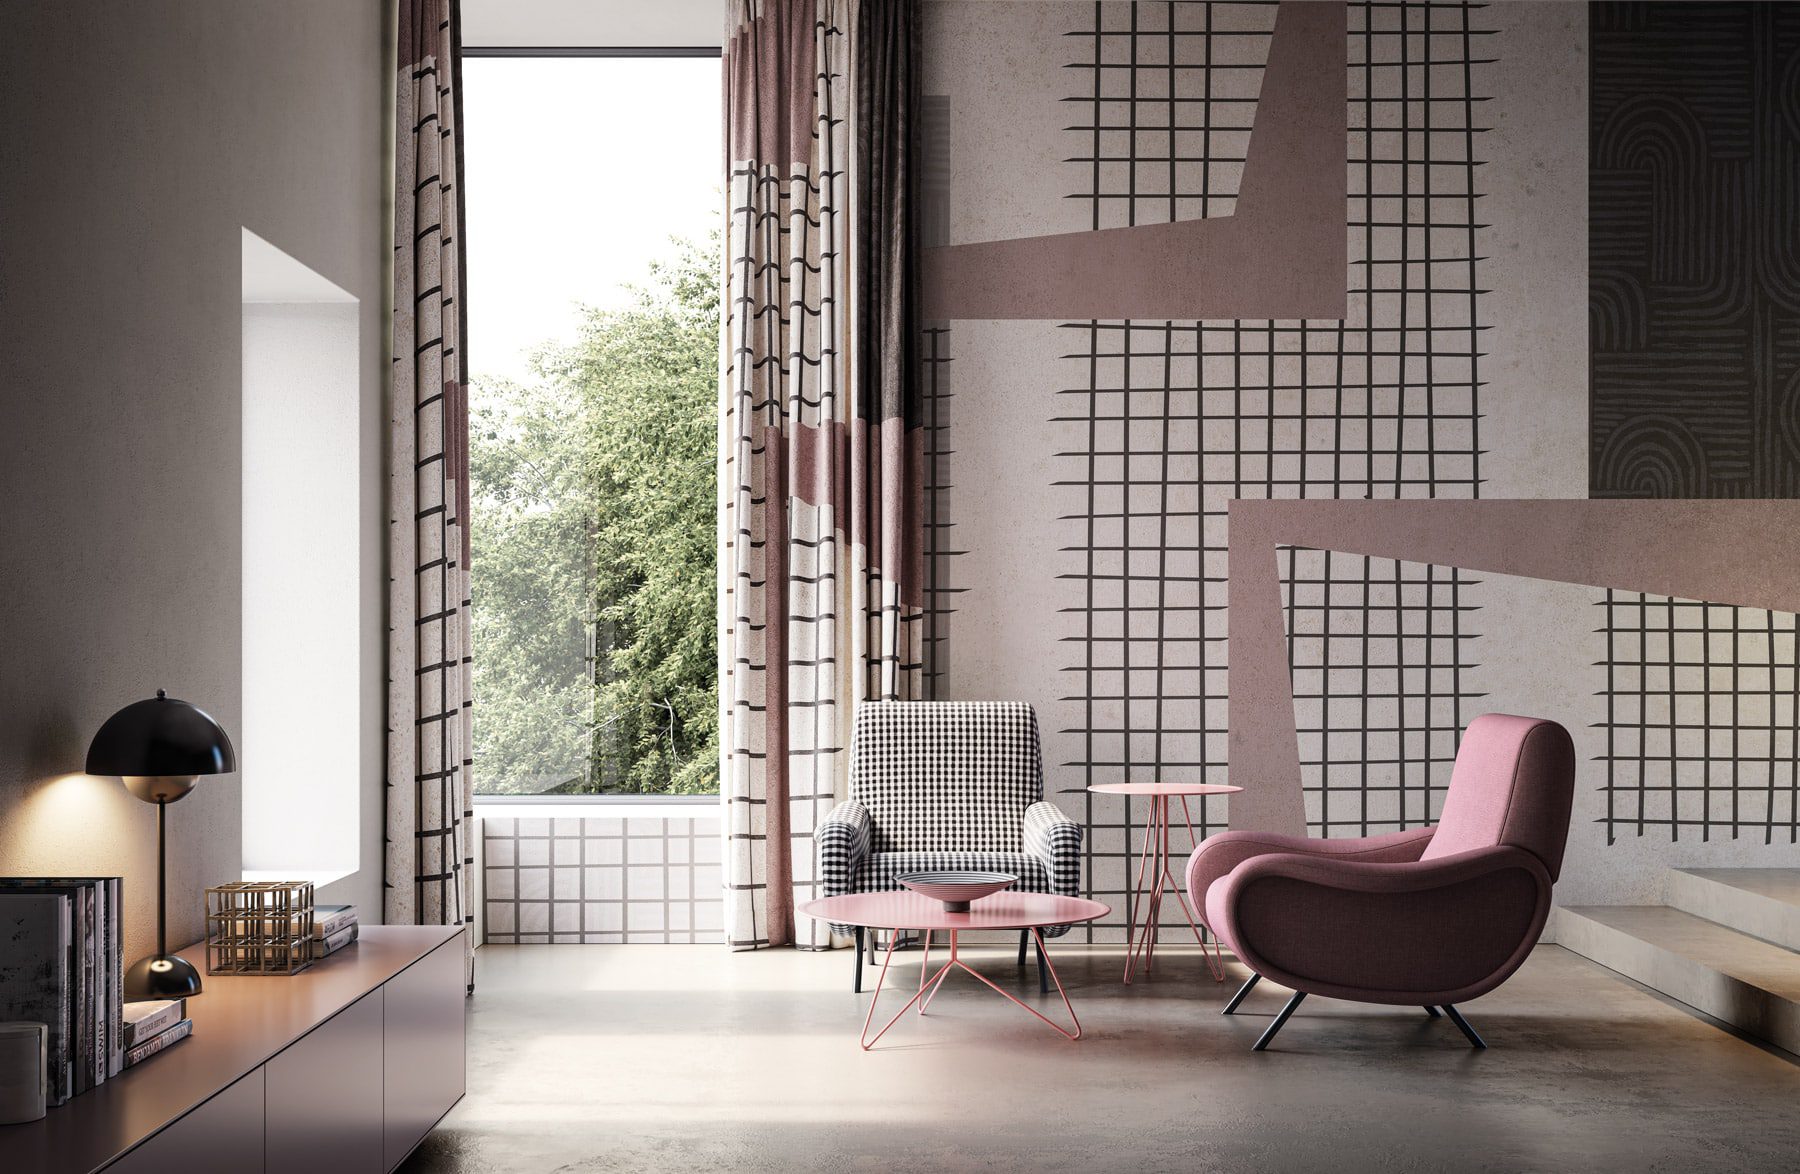 The Geometric Wallpaper Instabilelab is a style choice that combines Modernity and Design. Discover the exclusive collection.